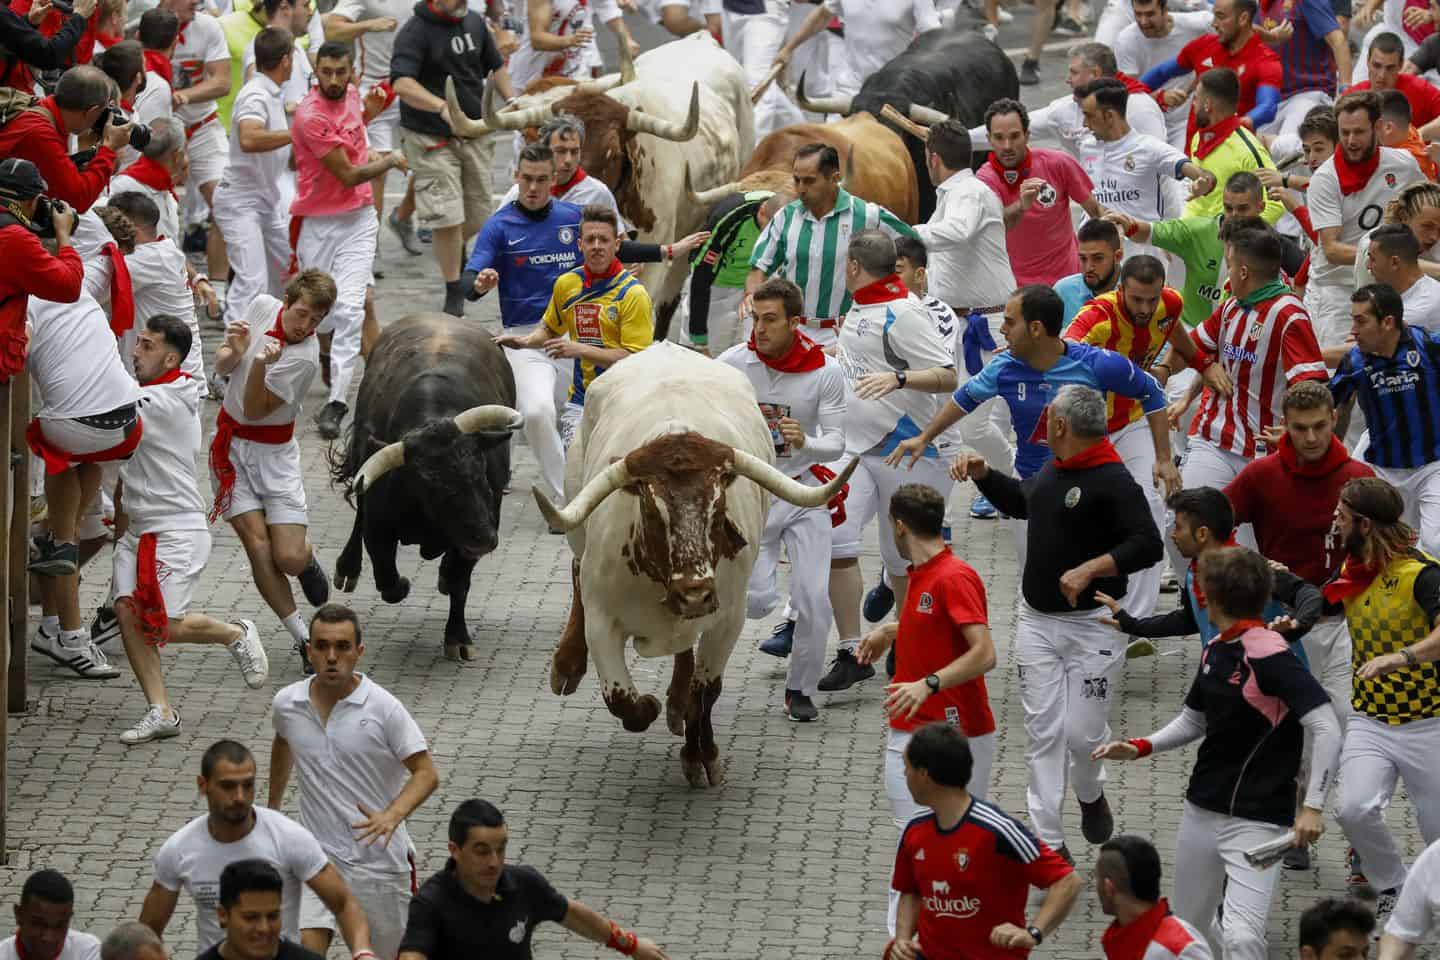 How to Survive the Pamplona Running with the Bulls In Spain